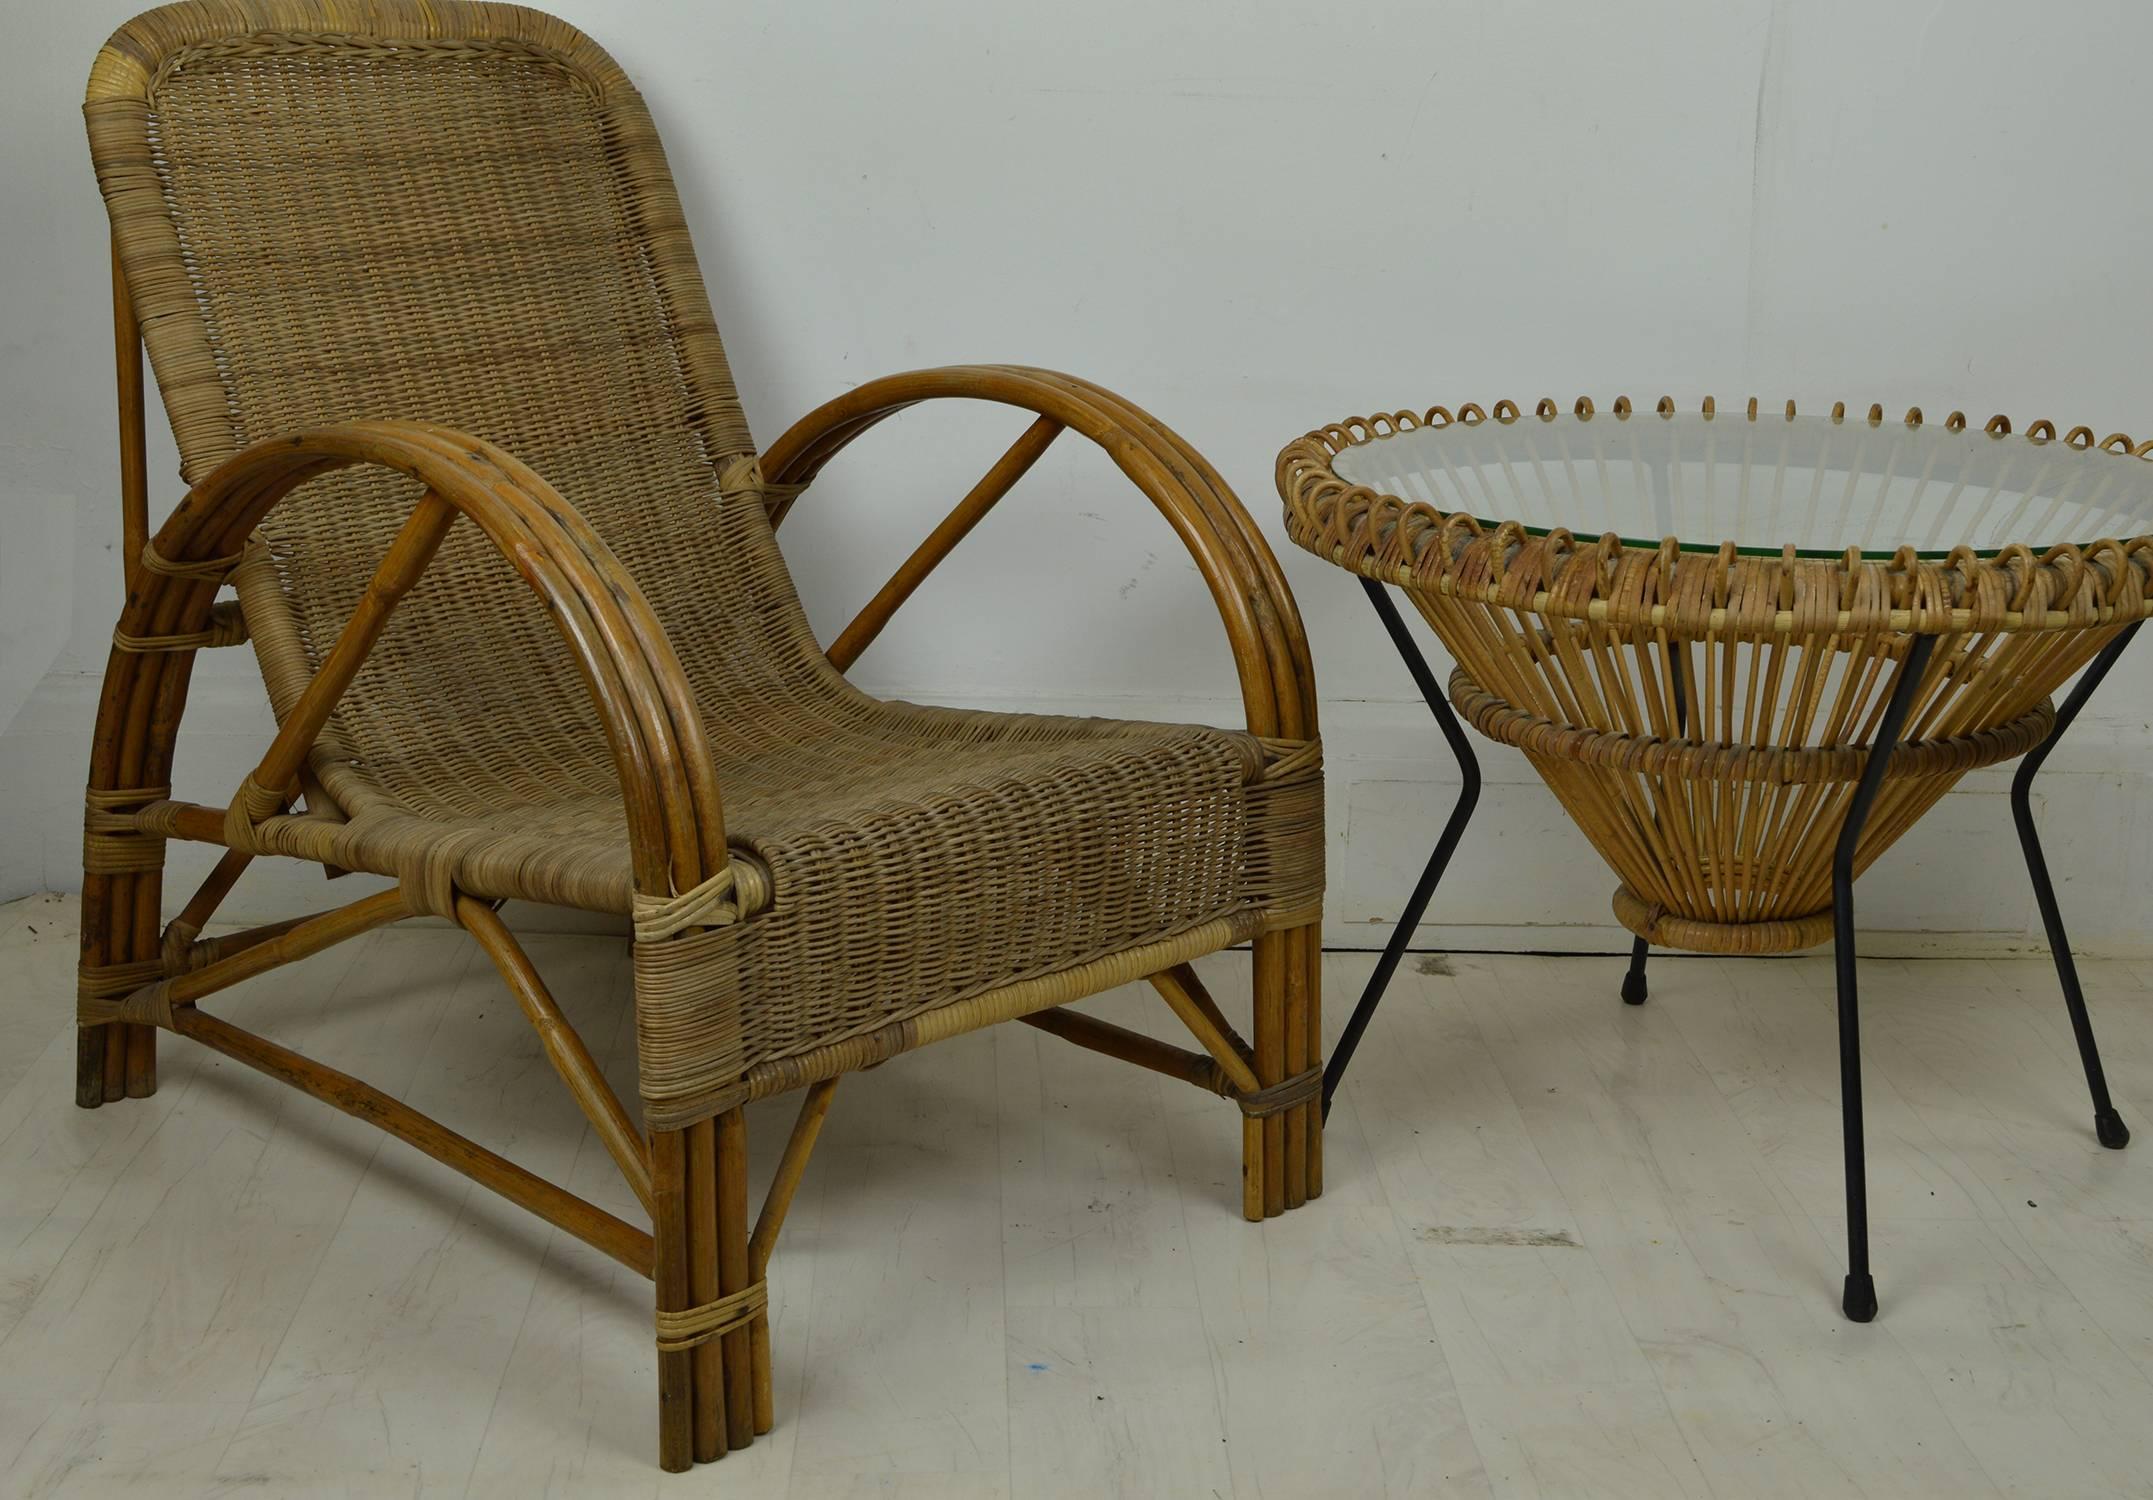 20th Century Pair of Vintage Midcentury Bamboo and Rattan Chairs